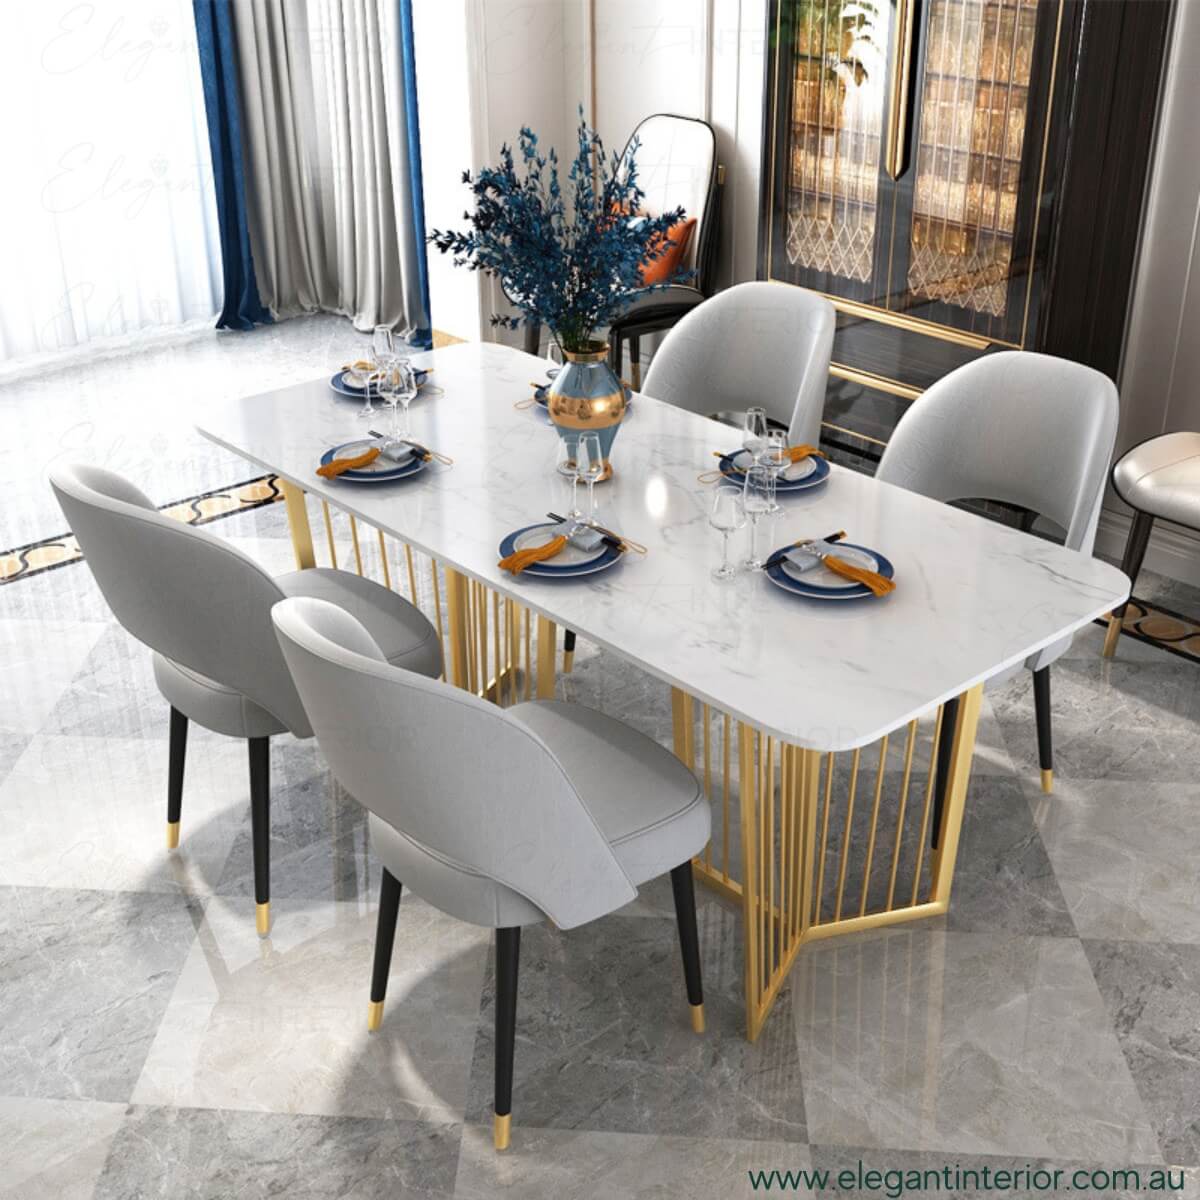 Frances-Marble Dining Table with Stainless Steel Base